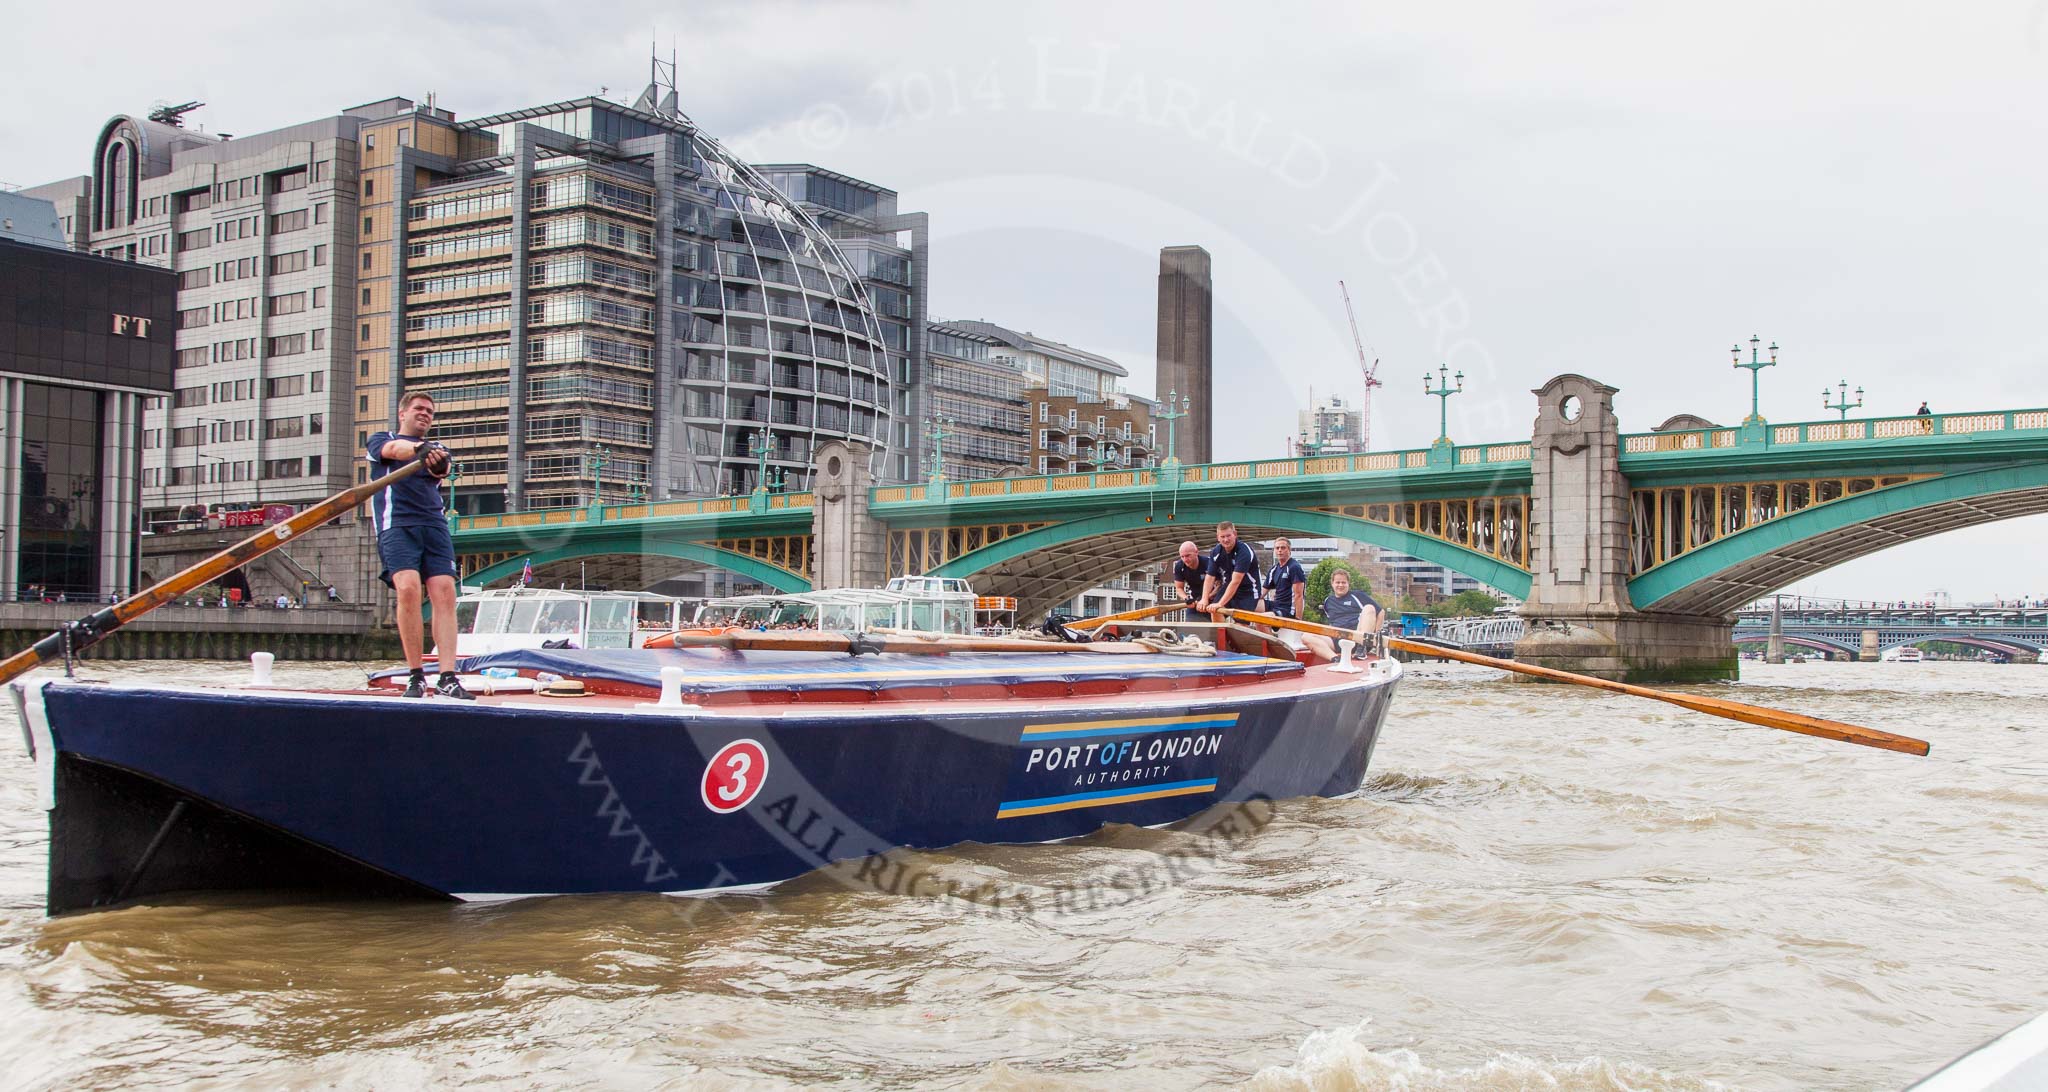 TOW River Thames Barge Driving Race 2014.
River Thames between Greenwich and Westminster,
London,

United Kingdom,
on 28 June 2014 at 13:46, image #294